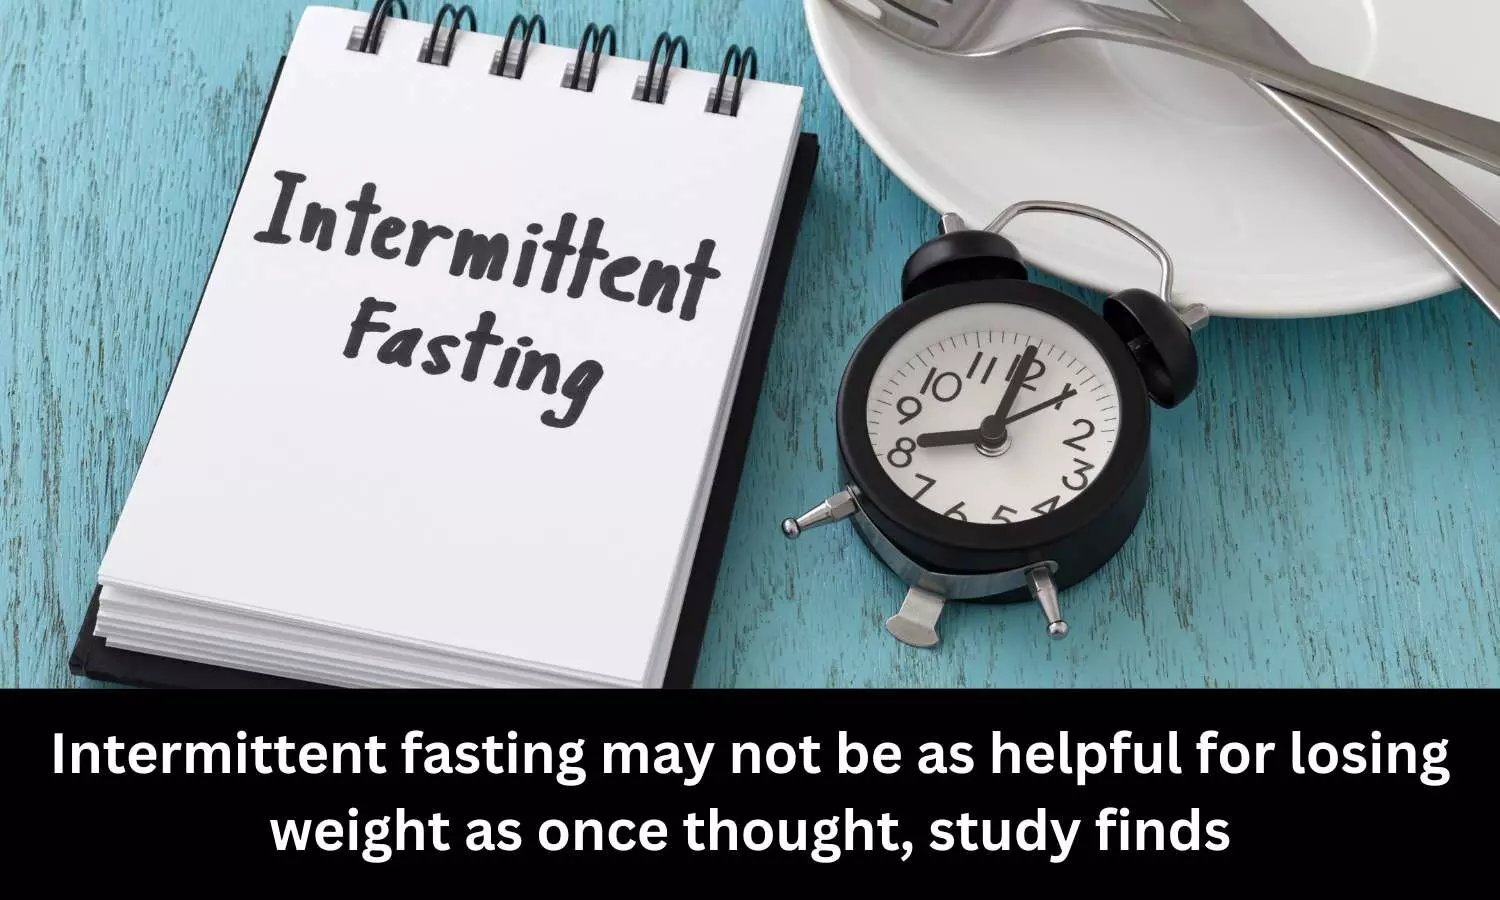 Intermittent fasting may not be as helpful for losing weight as once thought: Study